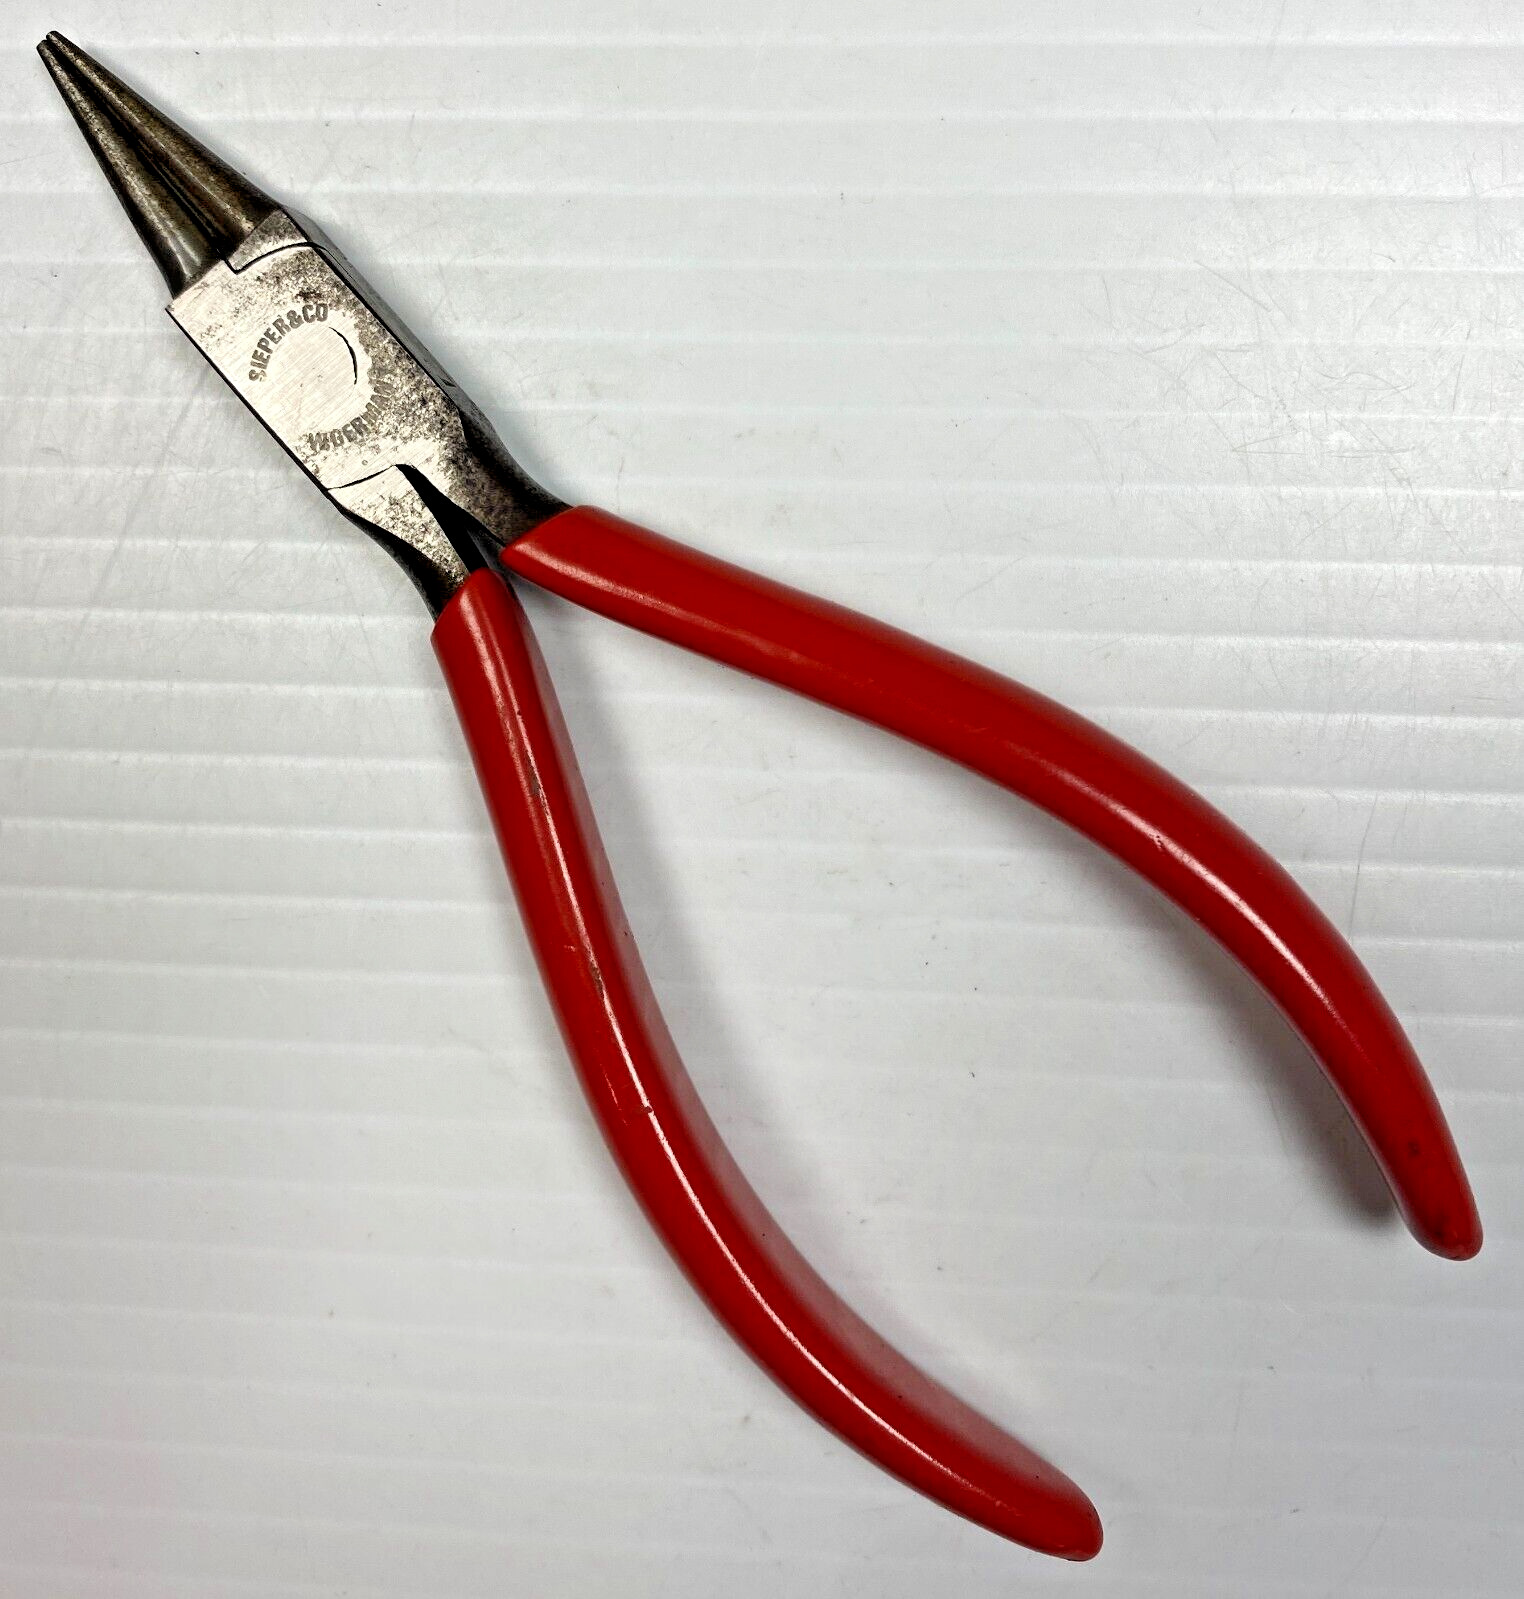 Rare Vintage Sieper & Co. Tools Round Nose Pliers with Red Grips made in Germany